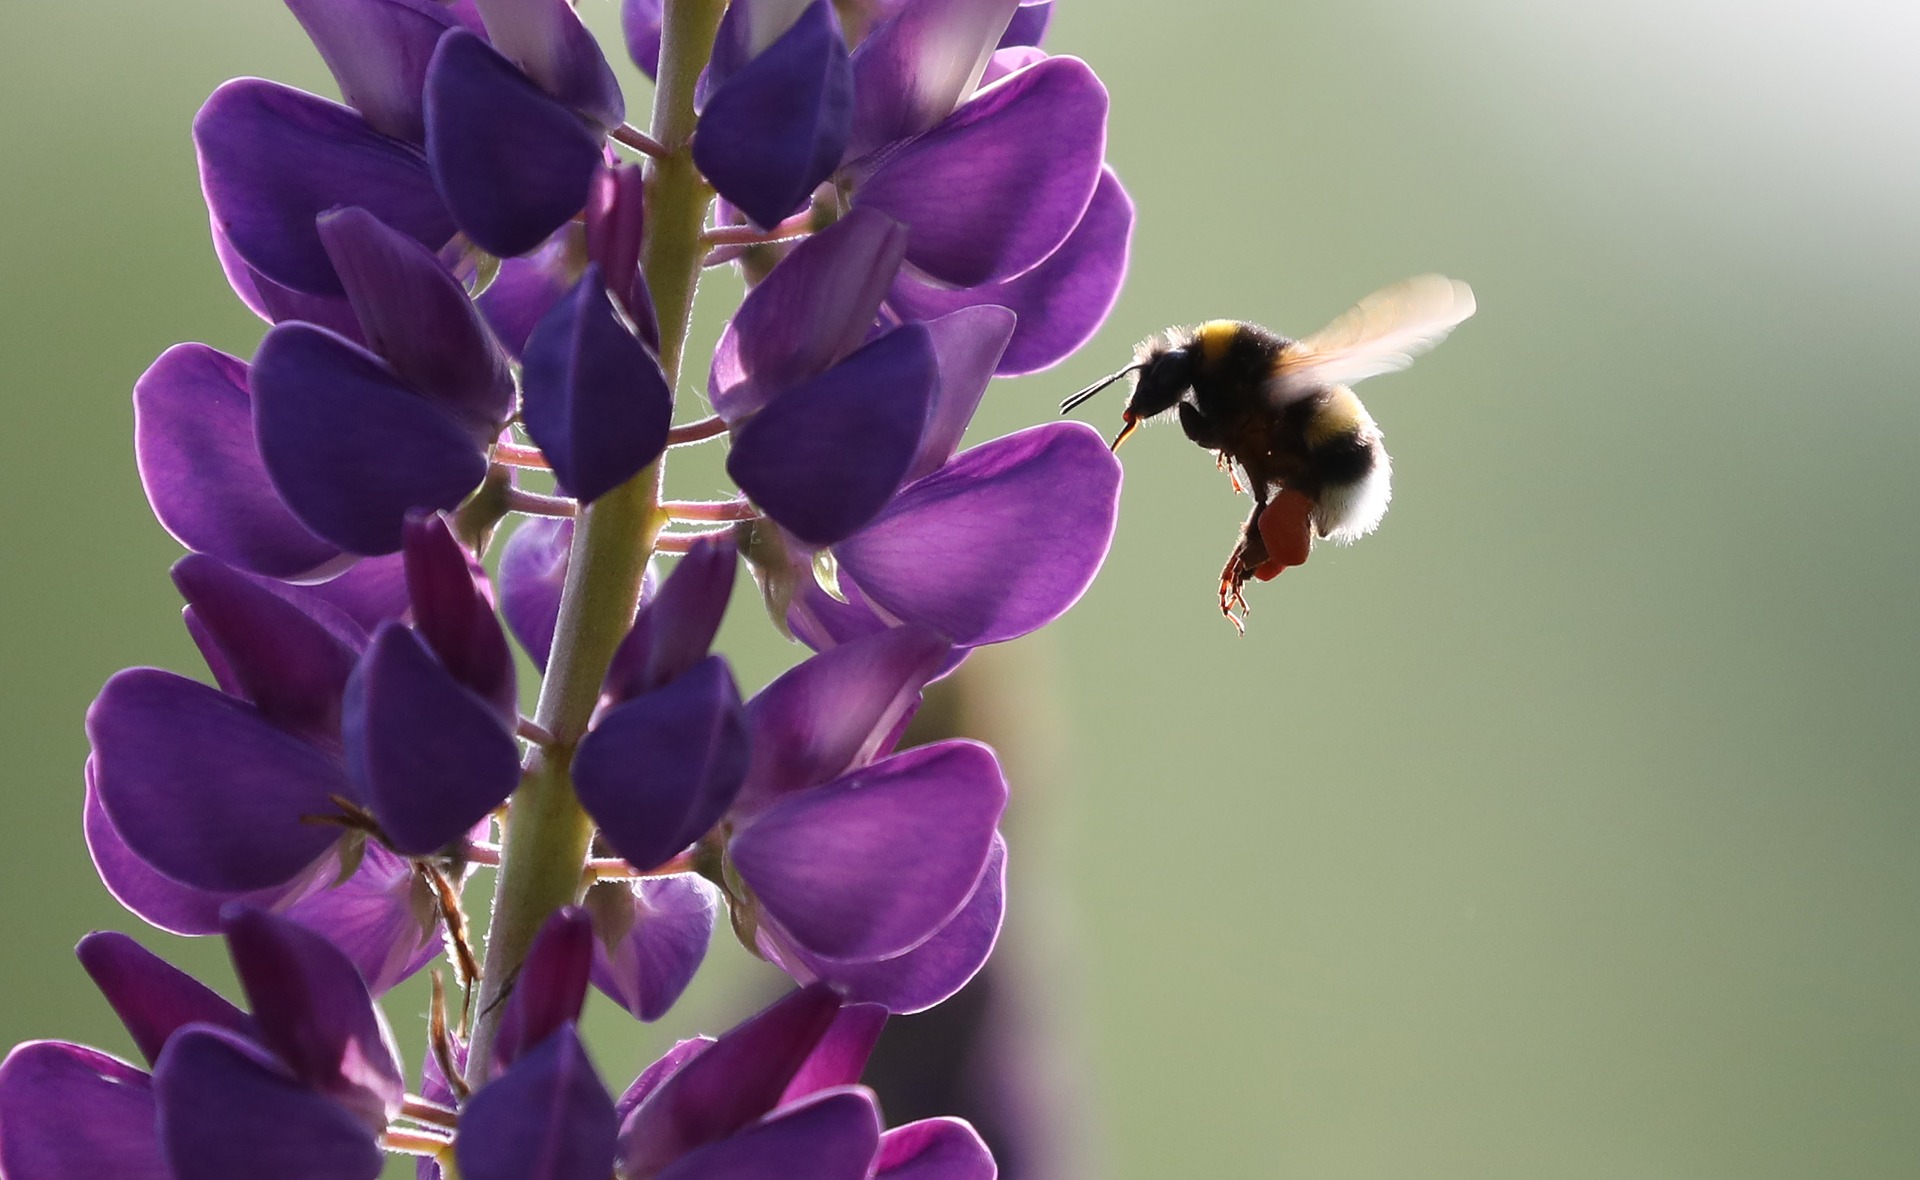 Attract or Defend? Secondary Compounds among tissues in two species of Lupine (Fabaceae)